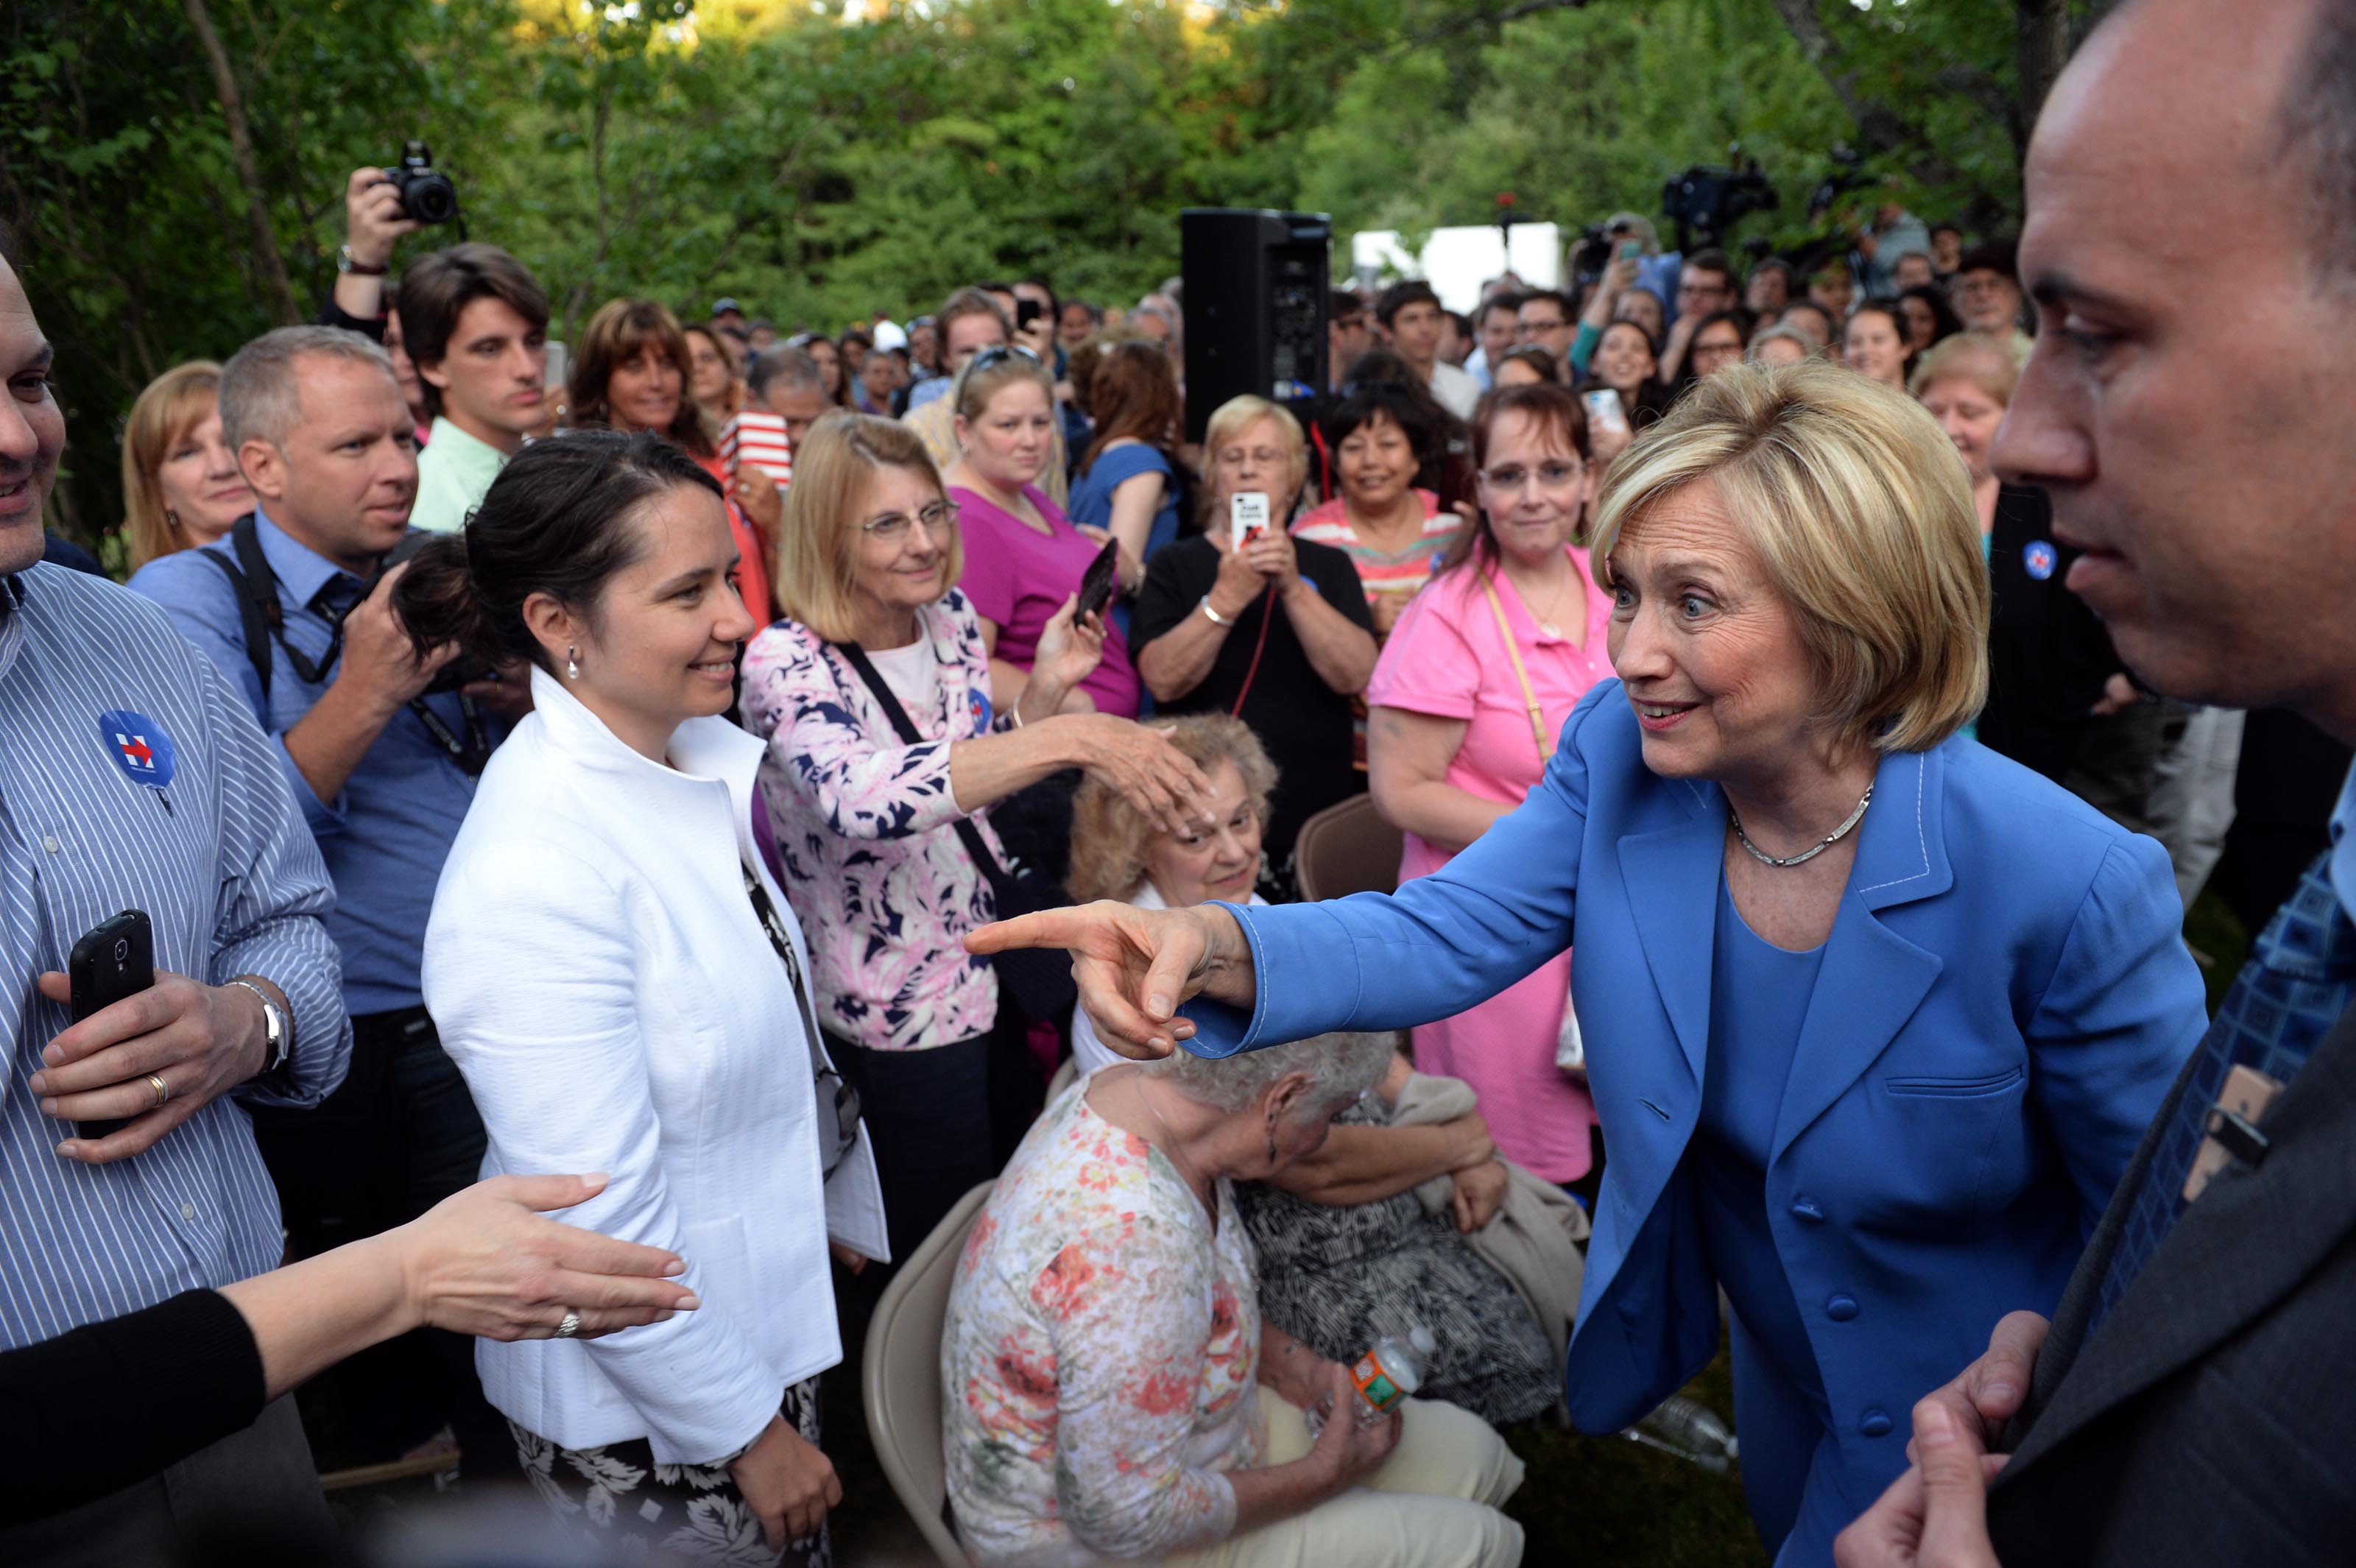 Hillary Clinton Discusses Economic Plan At New Hampshire Campaign Events